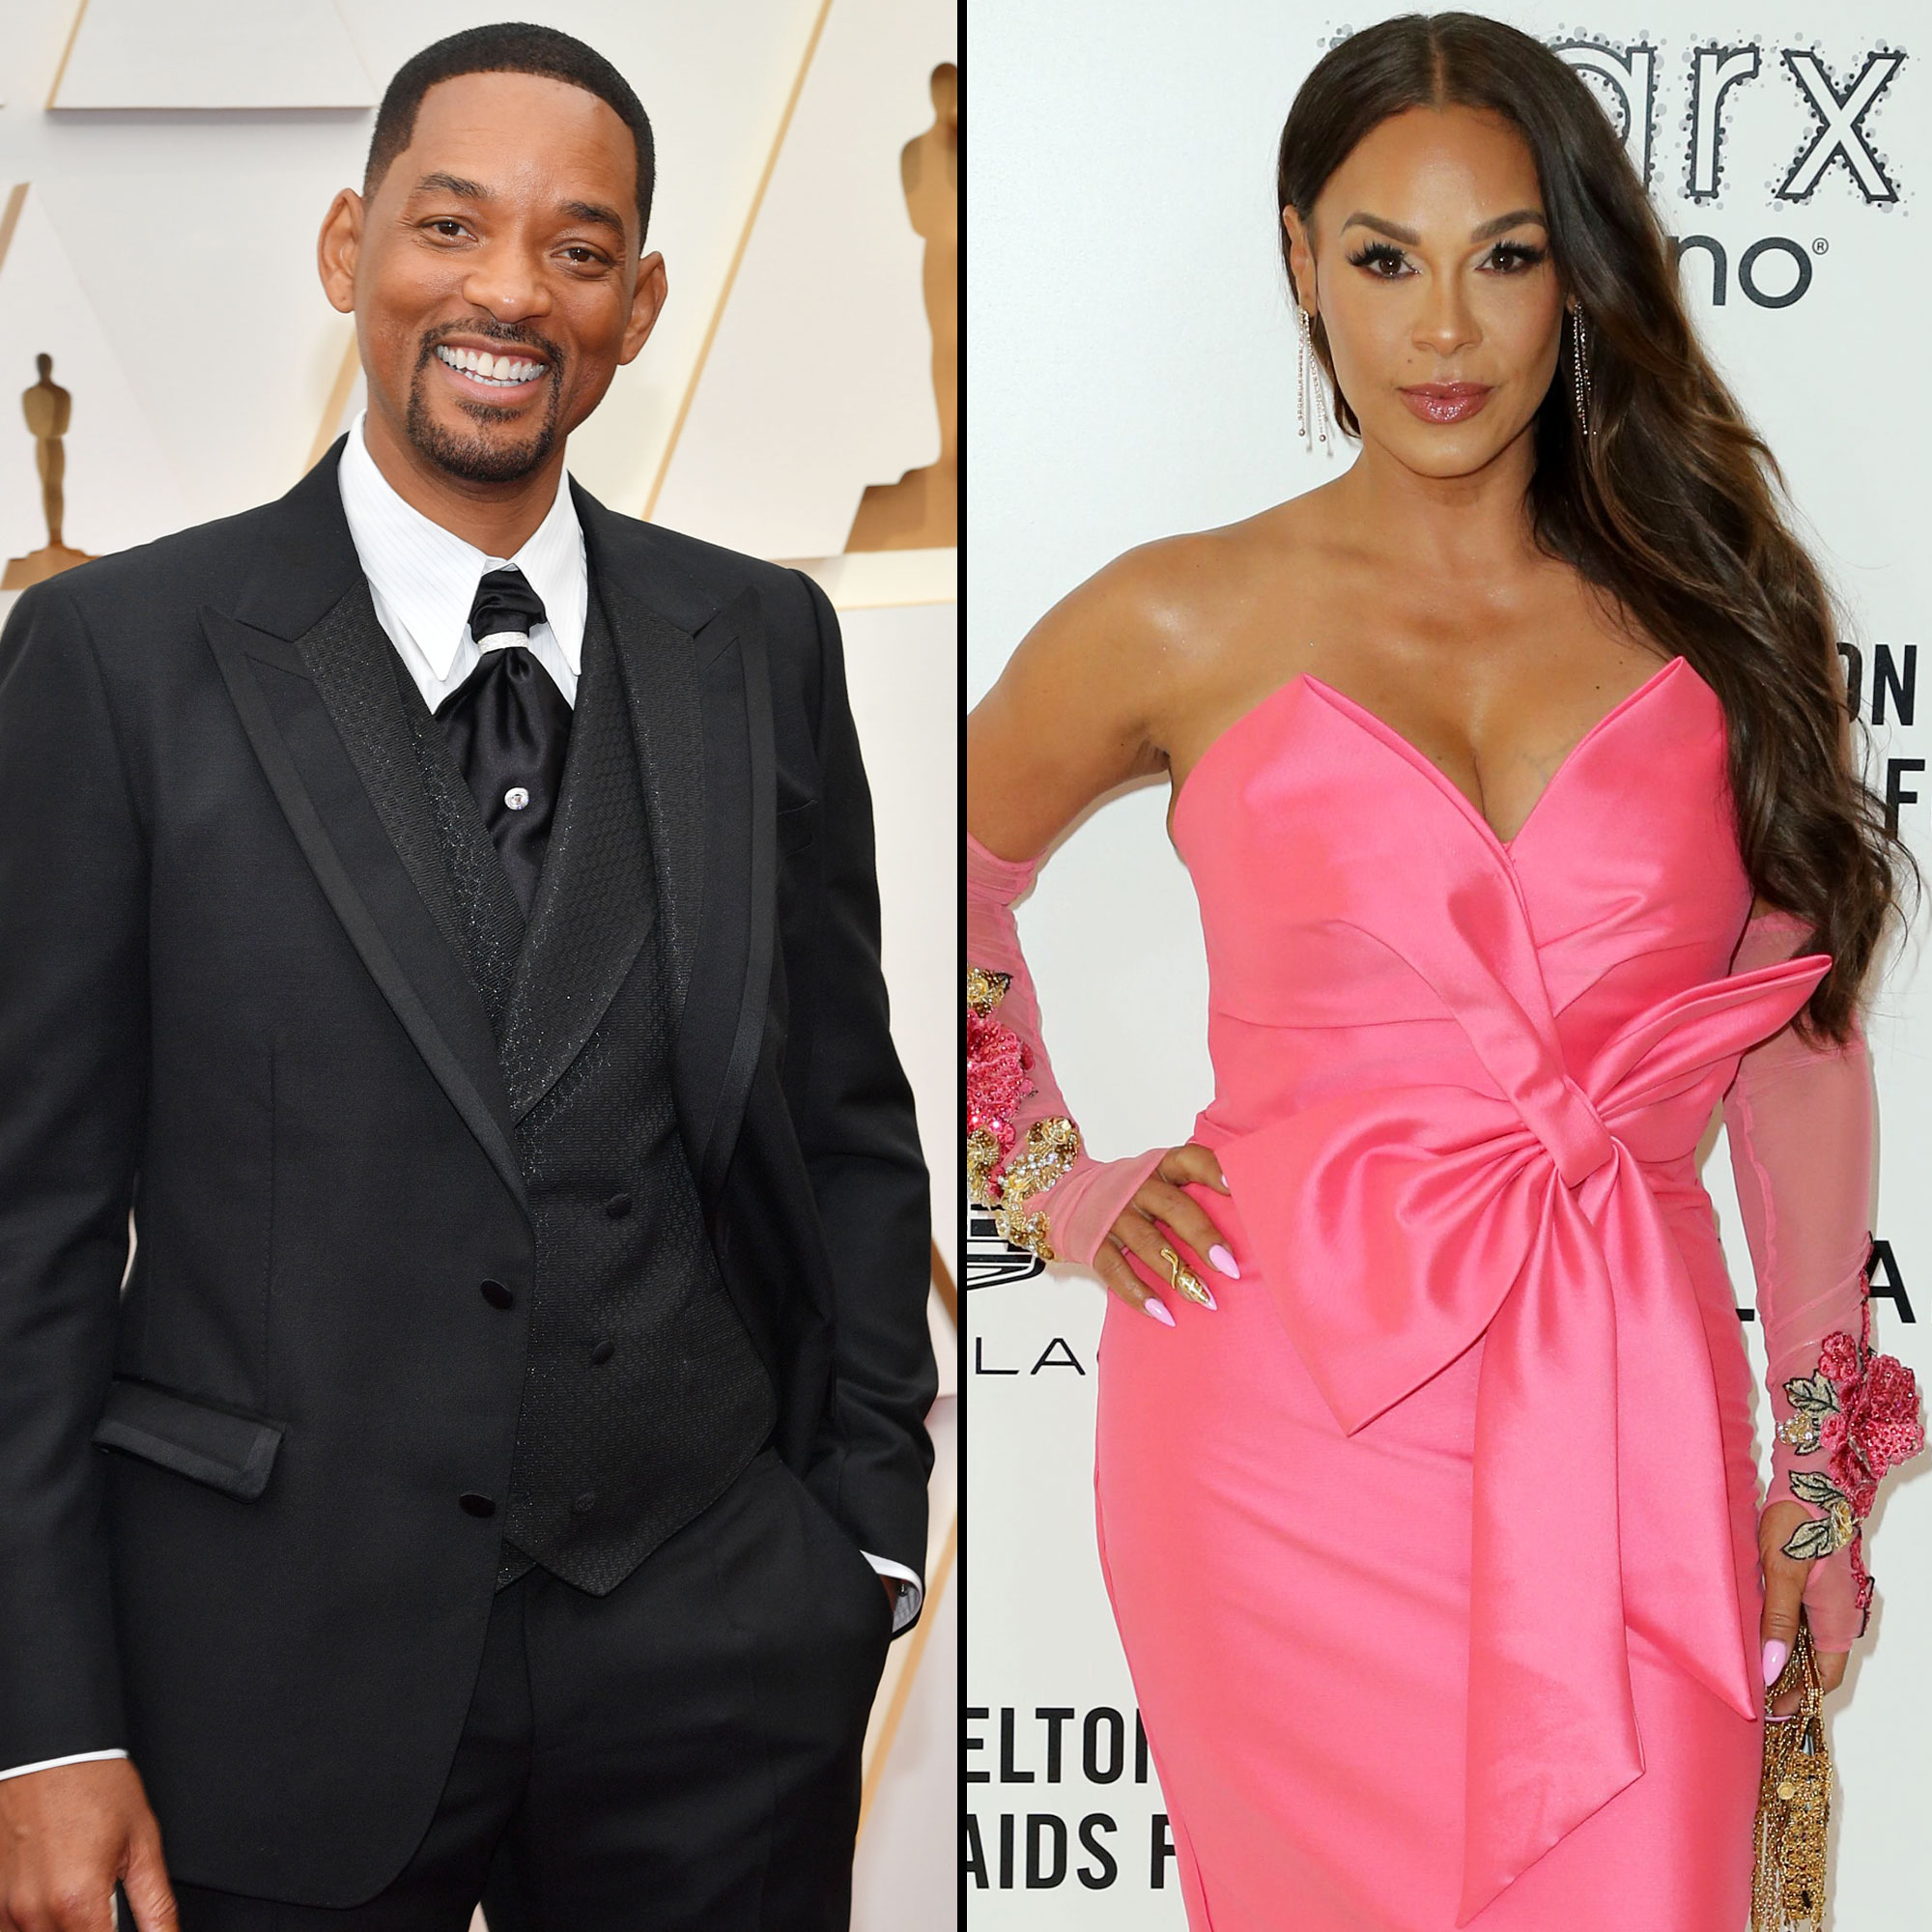 Will Smith Sex Porn - Will Smith Reunites With Ex-Wife Sheree Zampino After Oscars 2022 Win